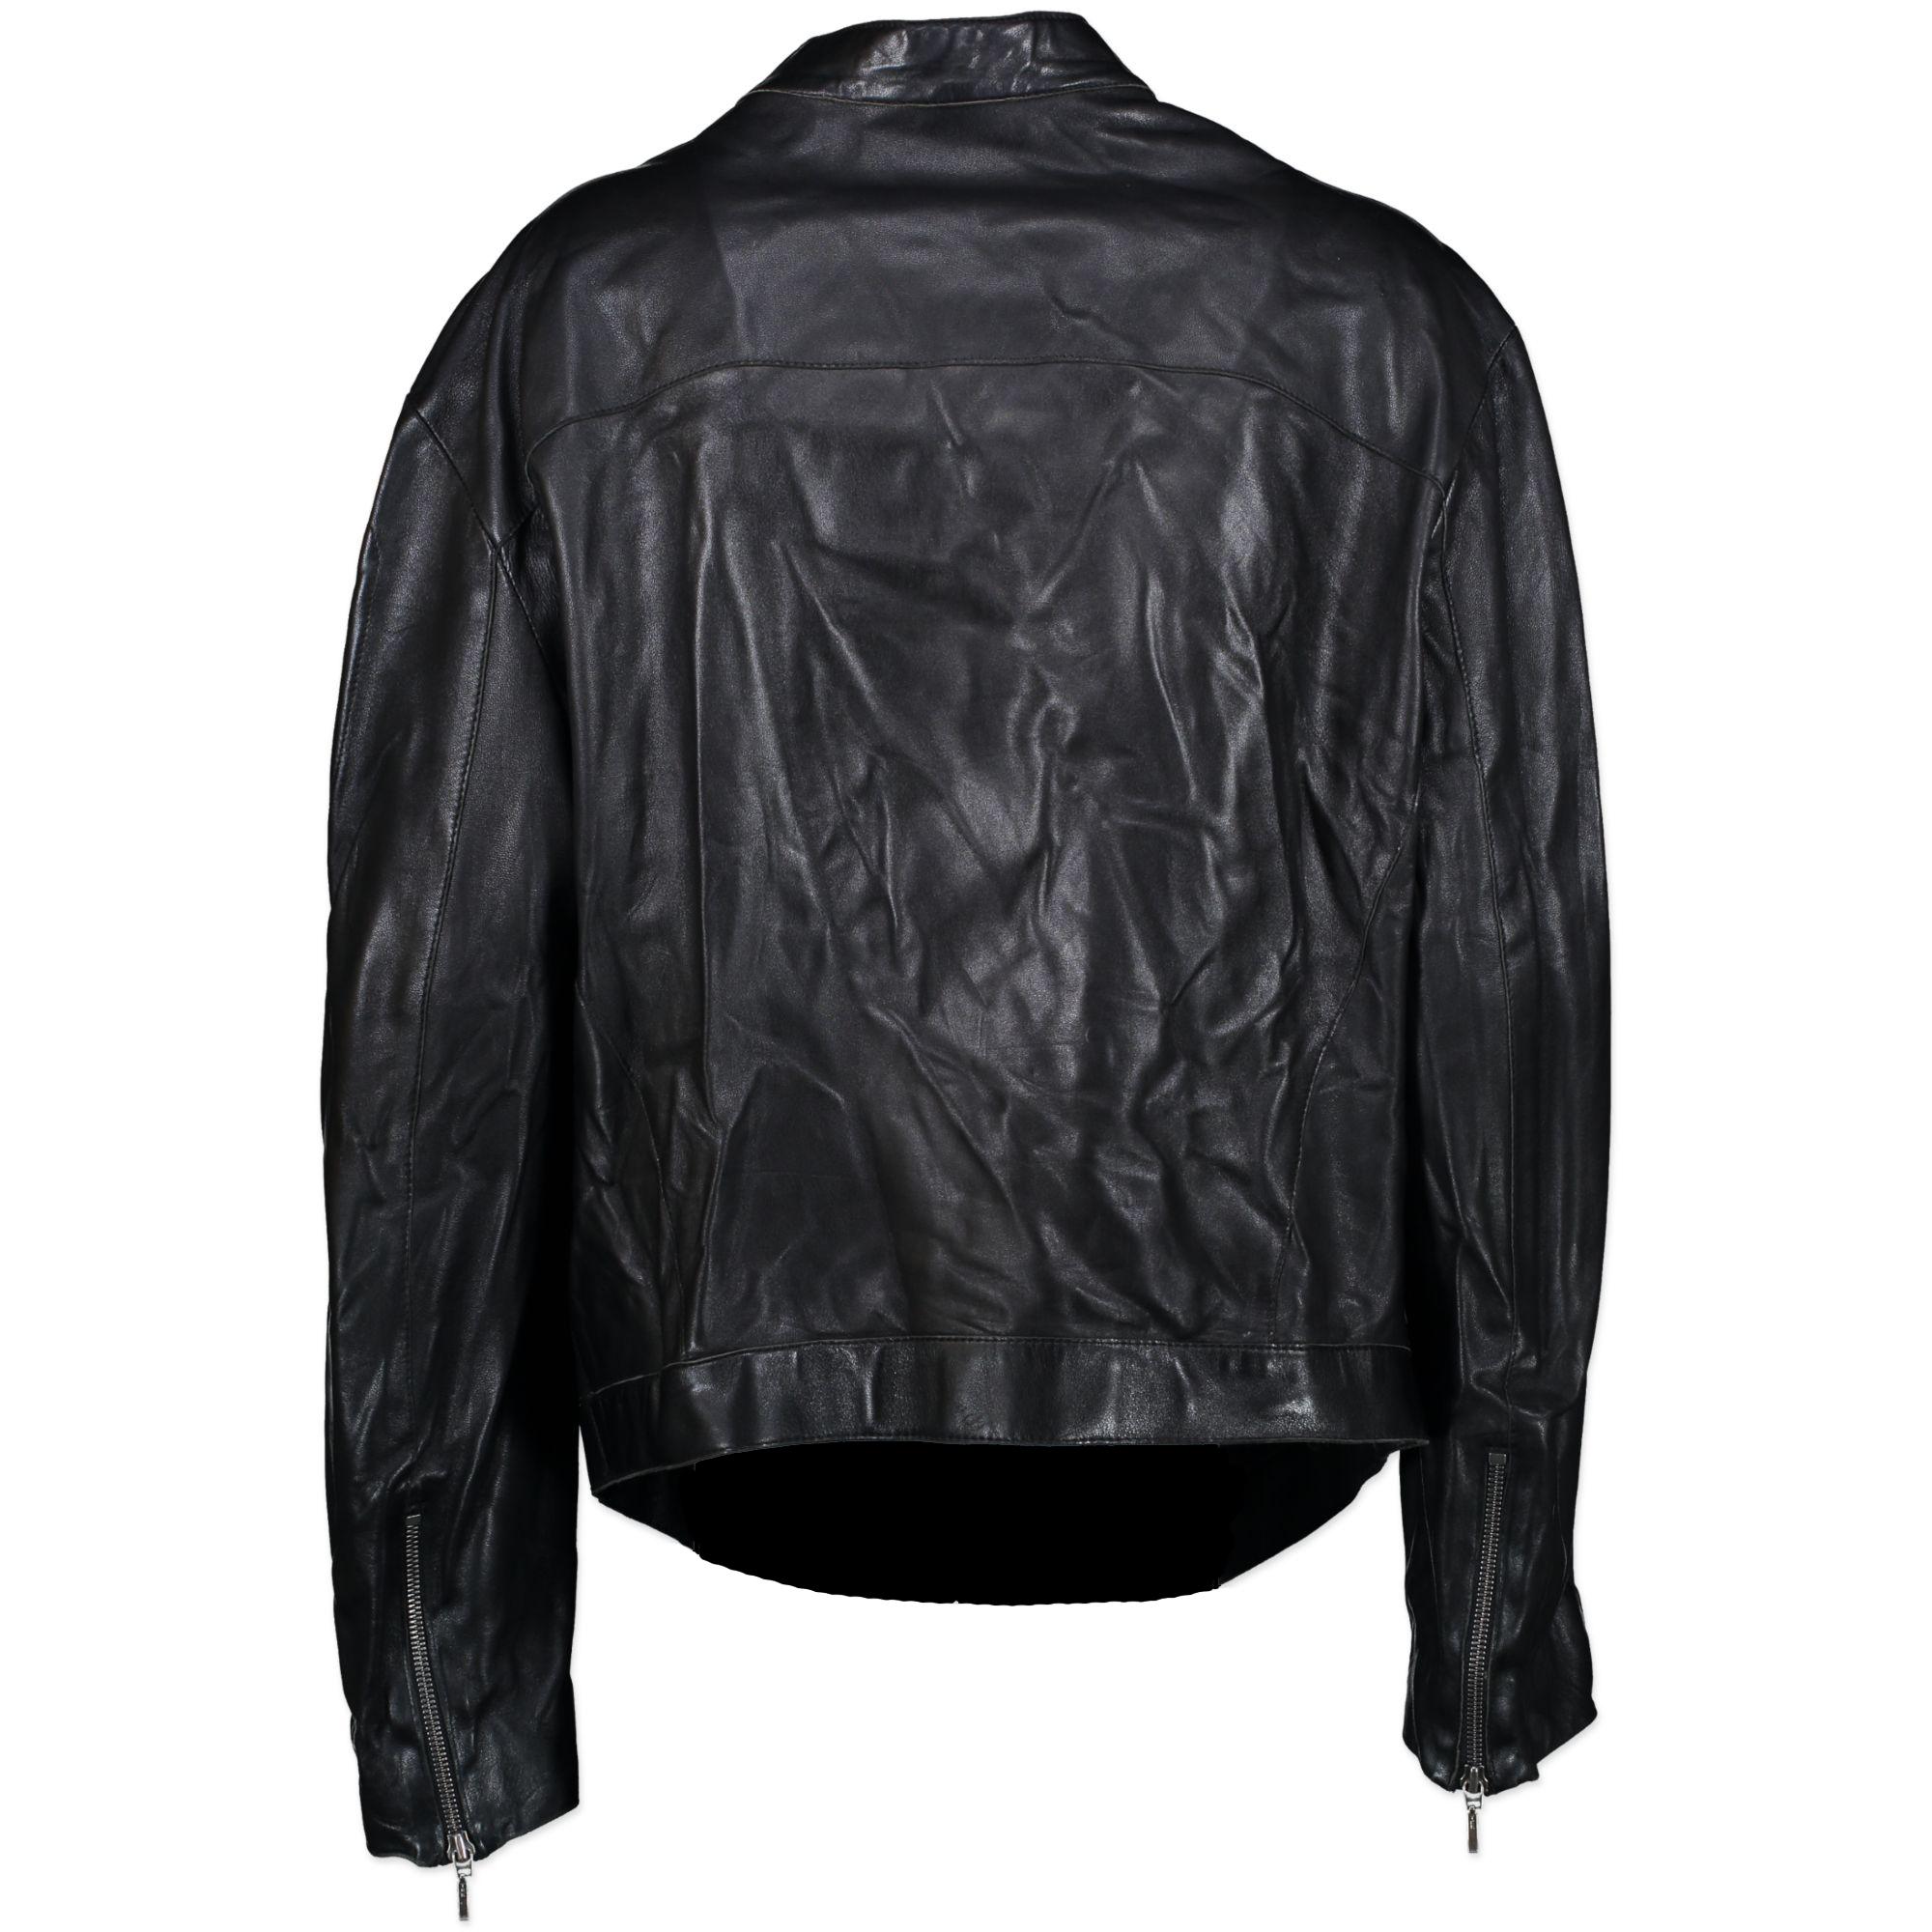 Thierry Mugler Vintage Leather Jacket - size M. This tailored Thierry Mugler Vintage Leather Jacket is crafted out of soft leather in black. The jacket comes in a siz M; 